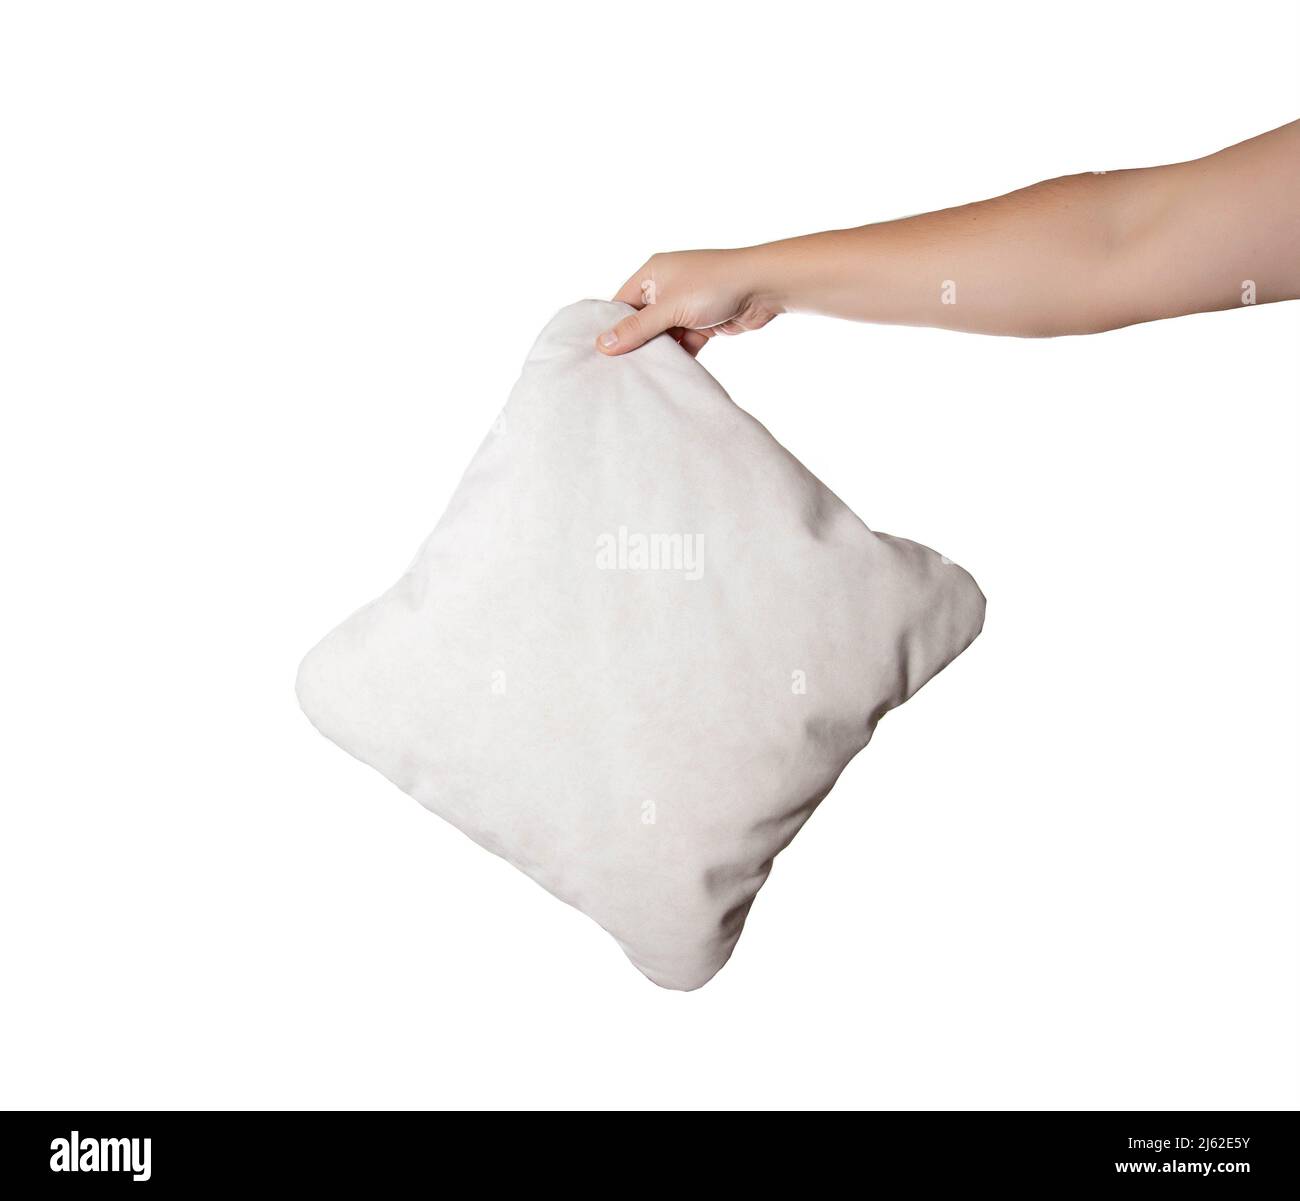 Gray pillow in a man's hand on a white background, isolate. Close-up, comfortable Stock Photo